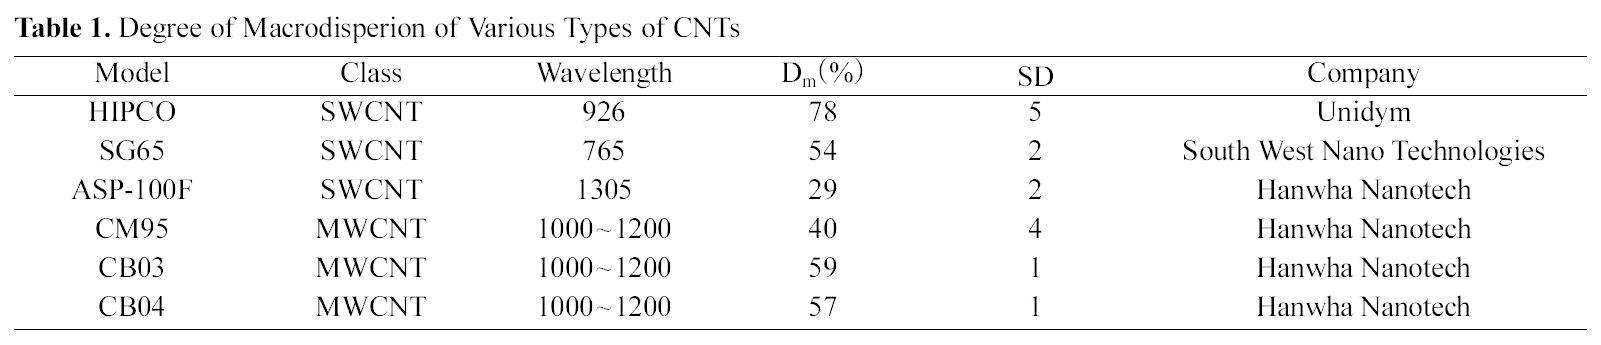 Degree of Macrodisperion of Various Types of CNTs